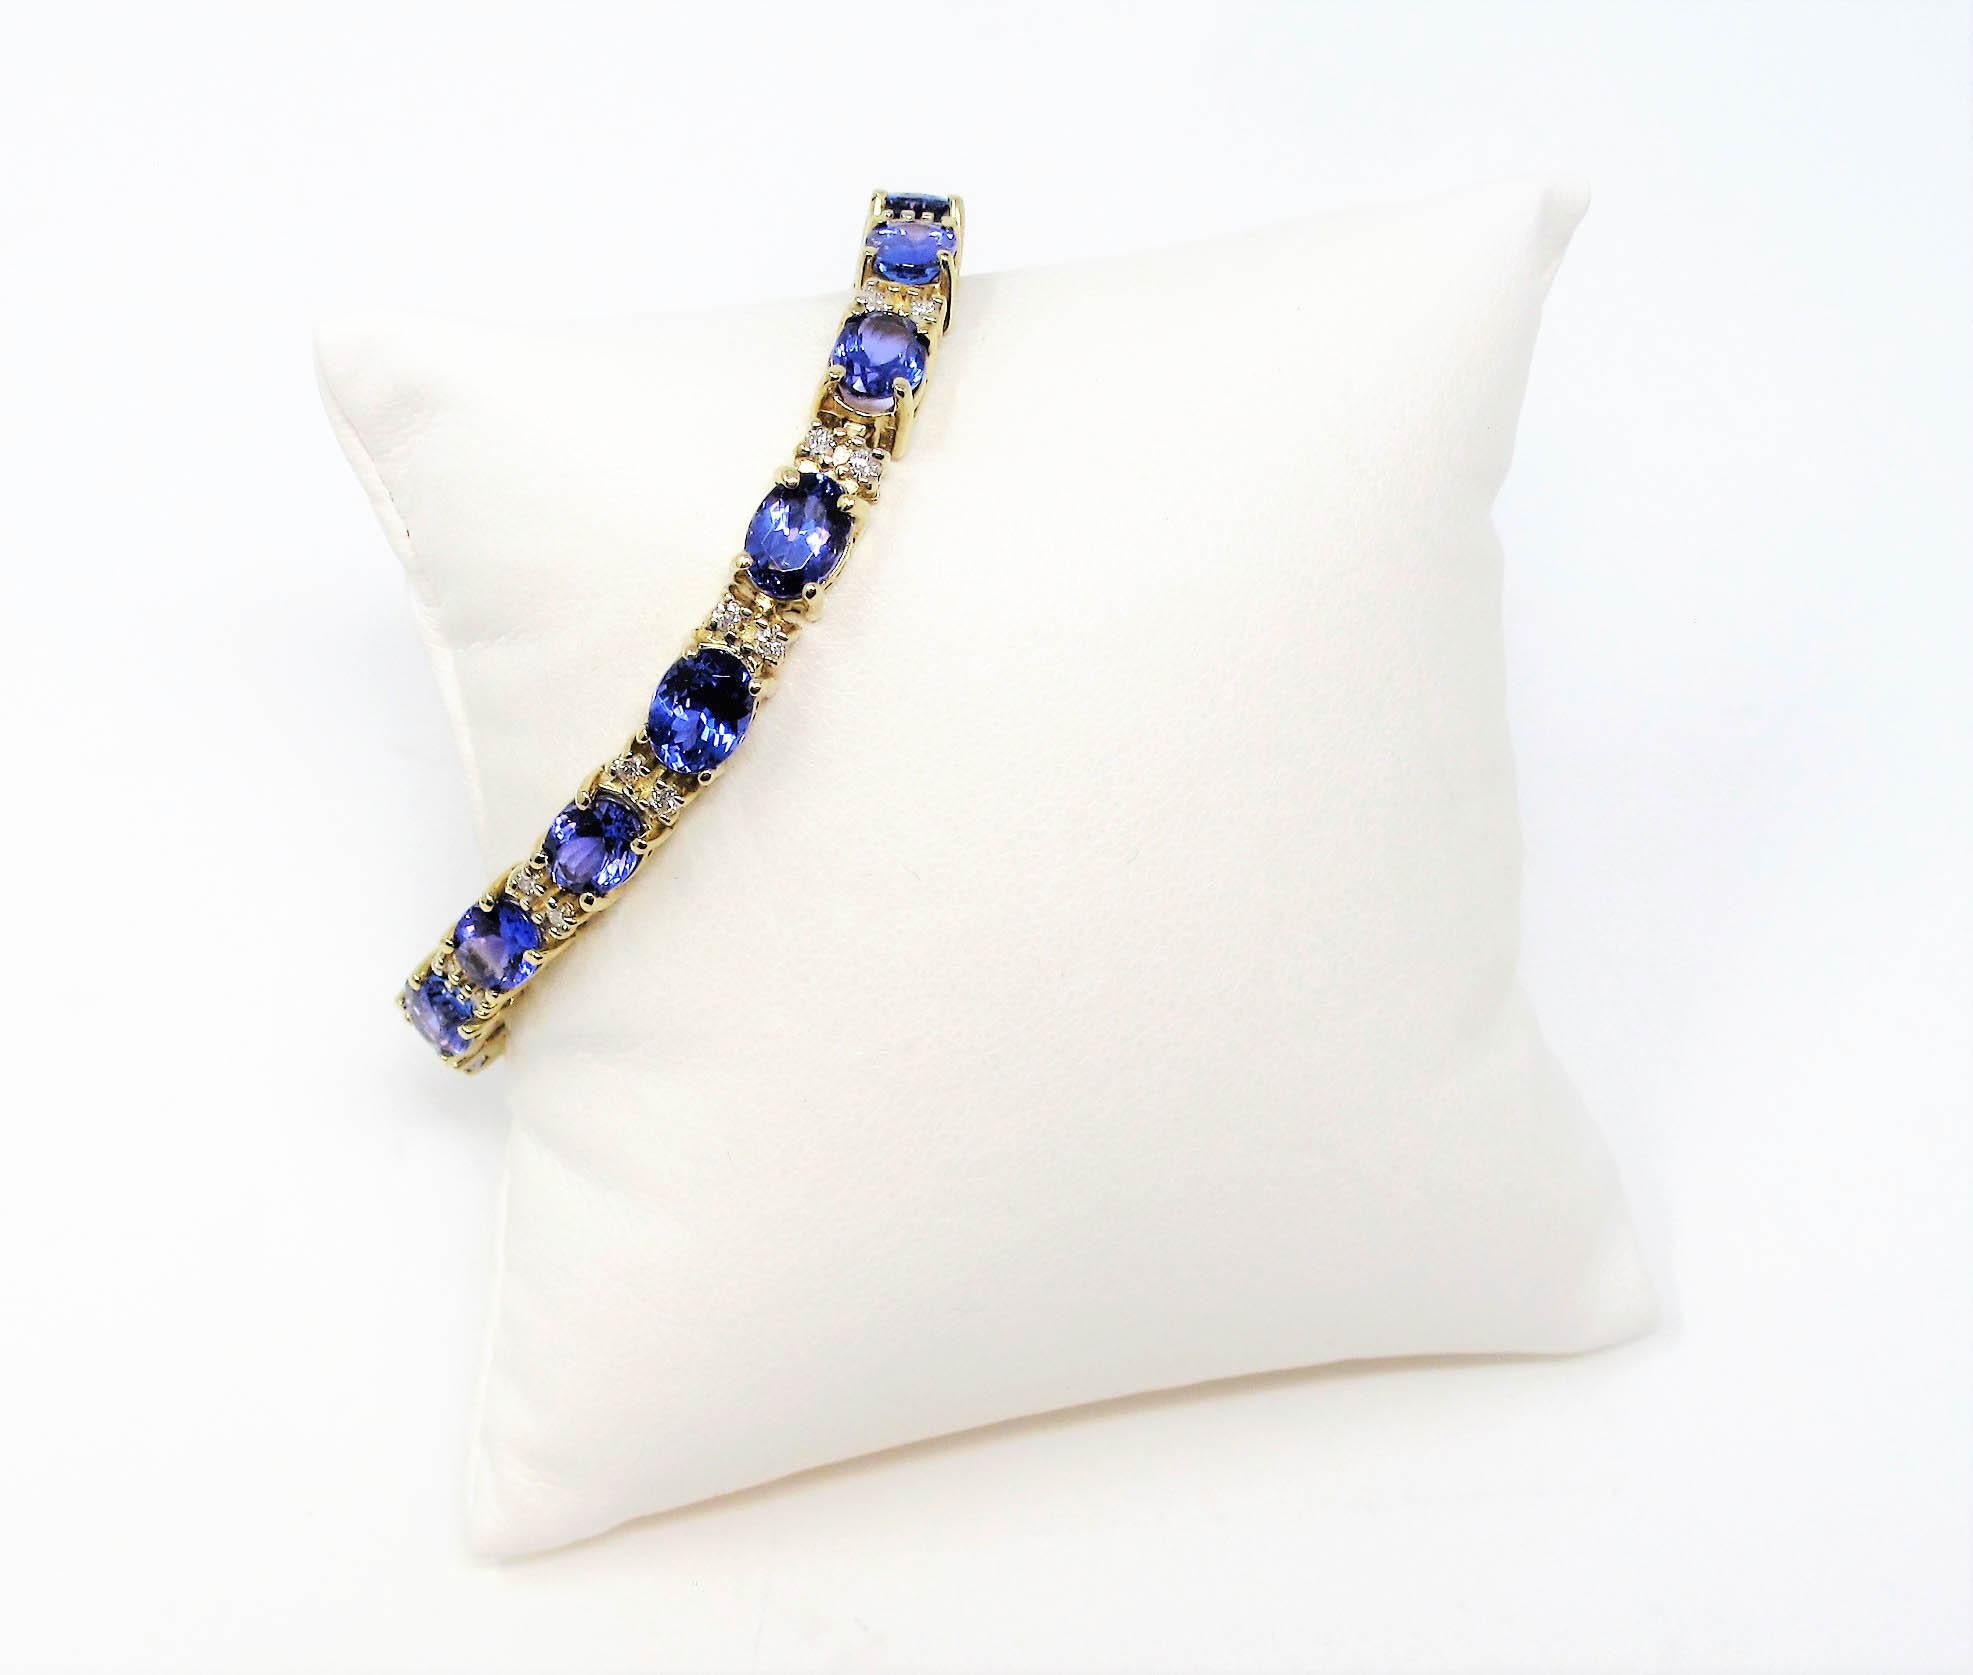 Adorn your wrist in this absolutely exquisite tanzanite and diamond tennis bracelet. The incredible vibrant tanzanite stones offer a stunning richness while the icy white diamonds dazzle throughout the piece. The sleek, straight line design sits